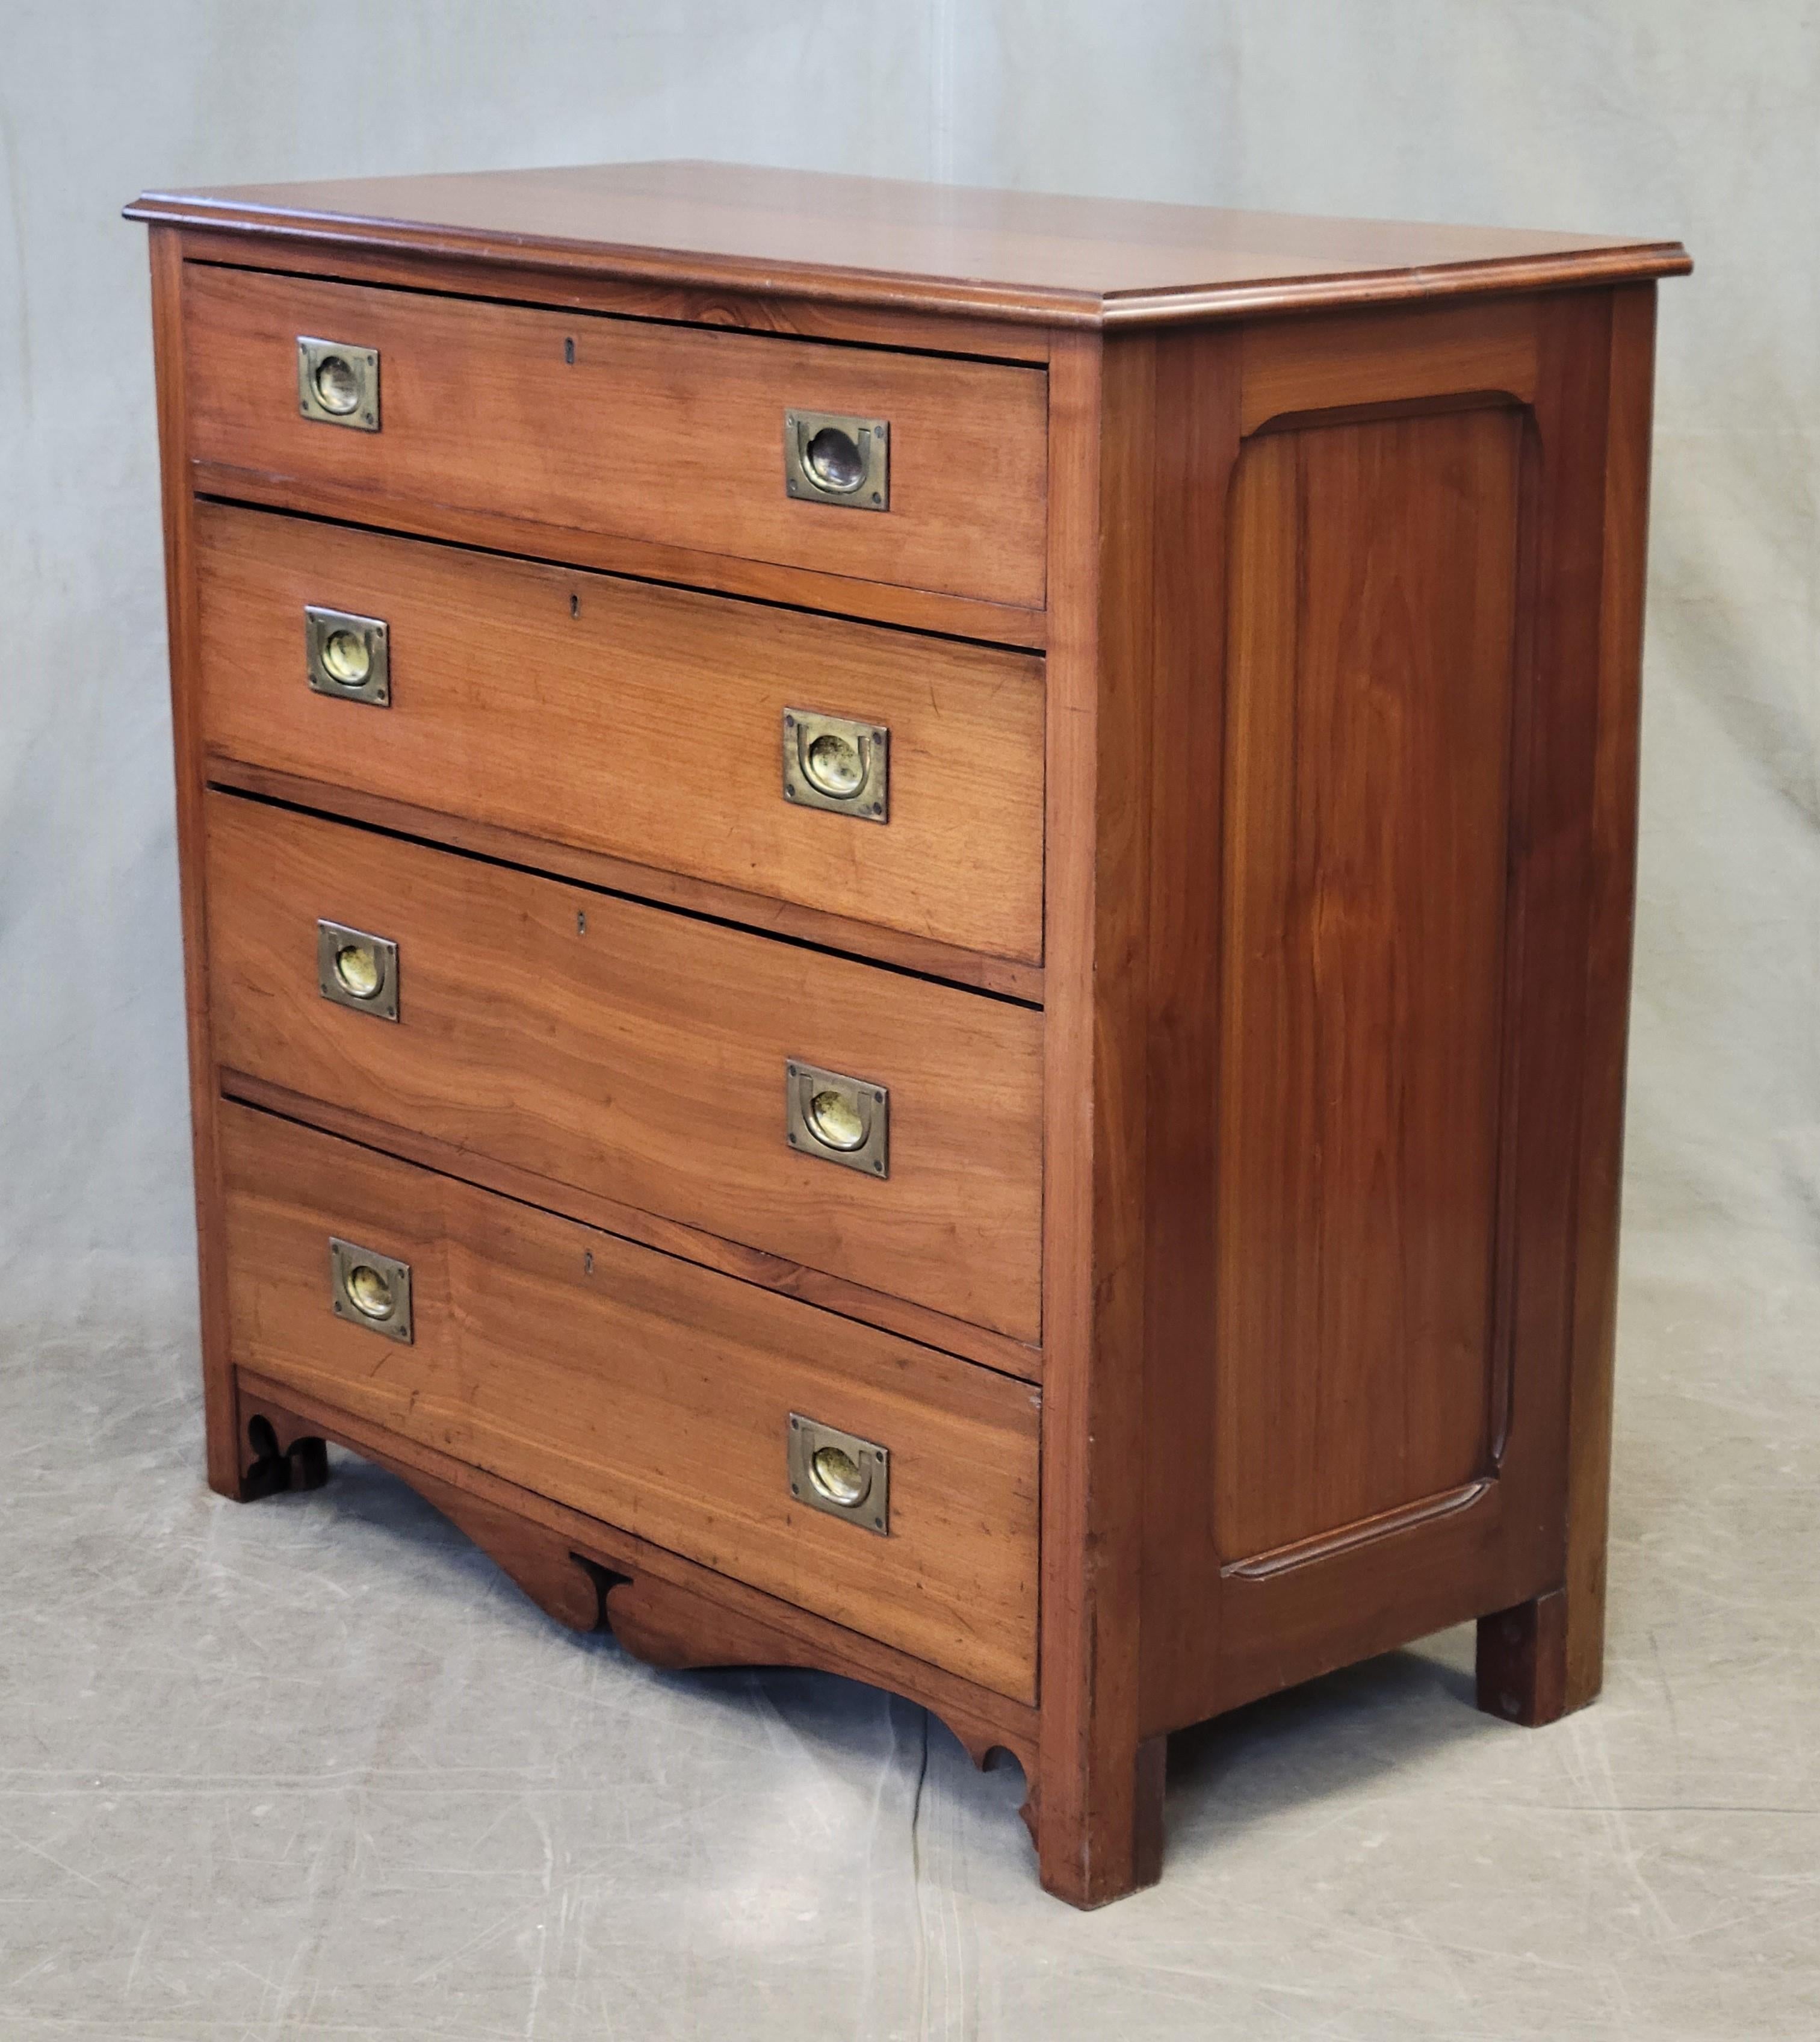 An elegant and functional antique Scottish or English campaign style butler's desk chest of drawer. Crafted out of teak or sycamore (exterior) and elm (interior) with original brass hardware. The top drawer pulls out and folds down to reveal a